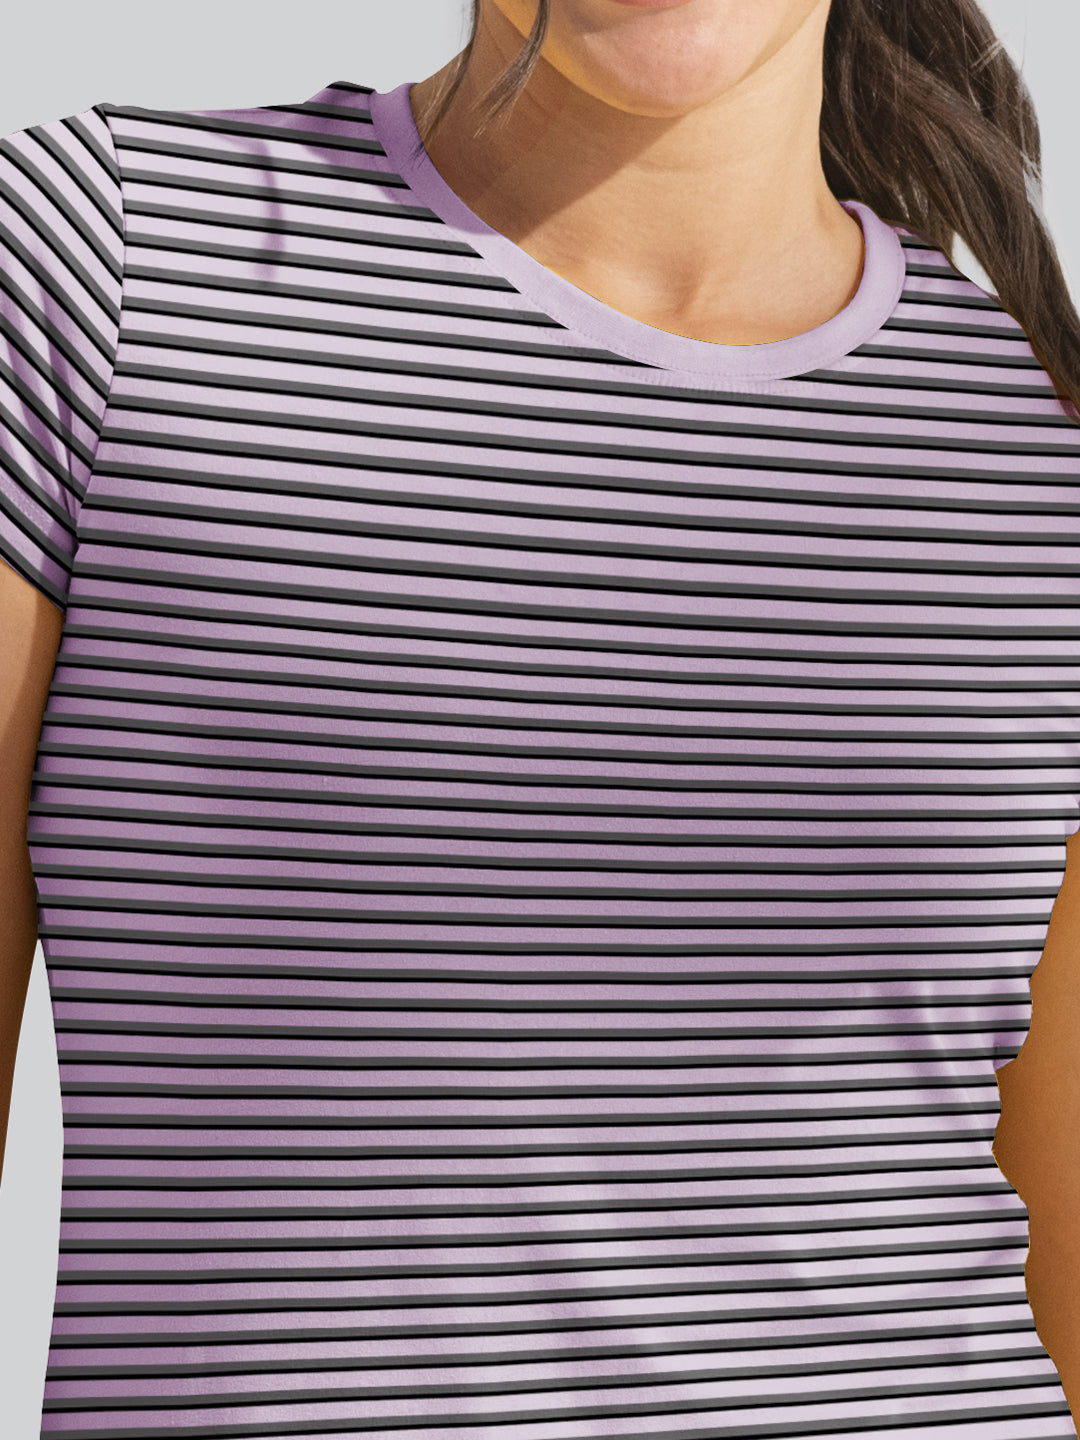 Violet Base with Grey and Black Stripes Round Neck T-Shirt #404